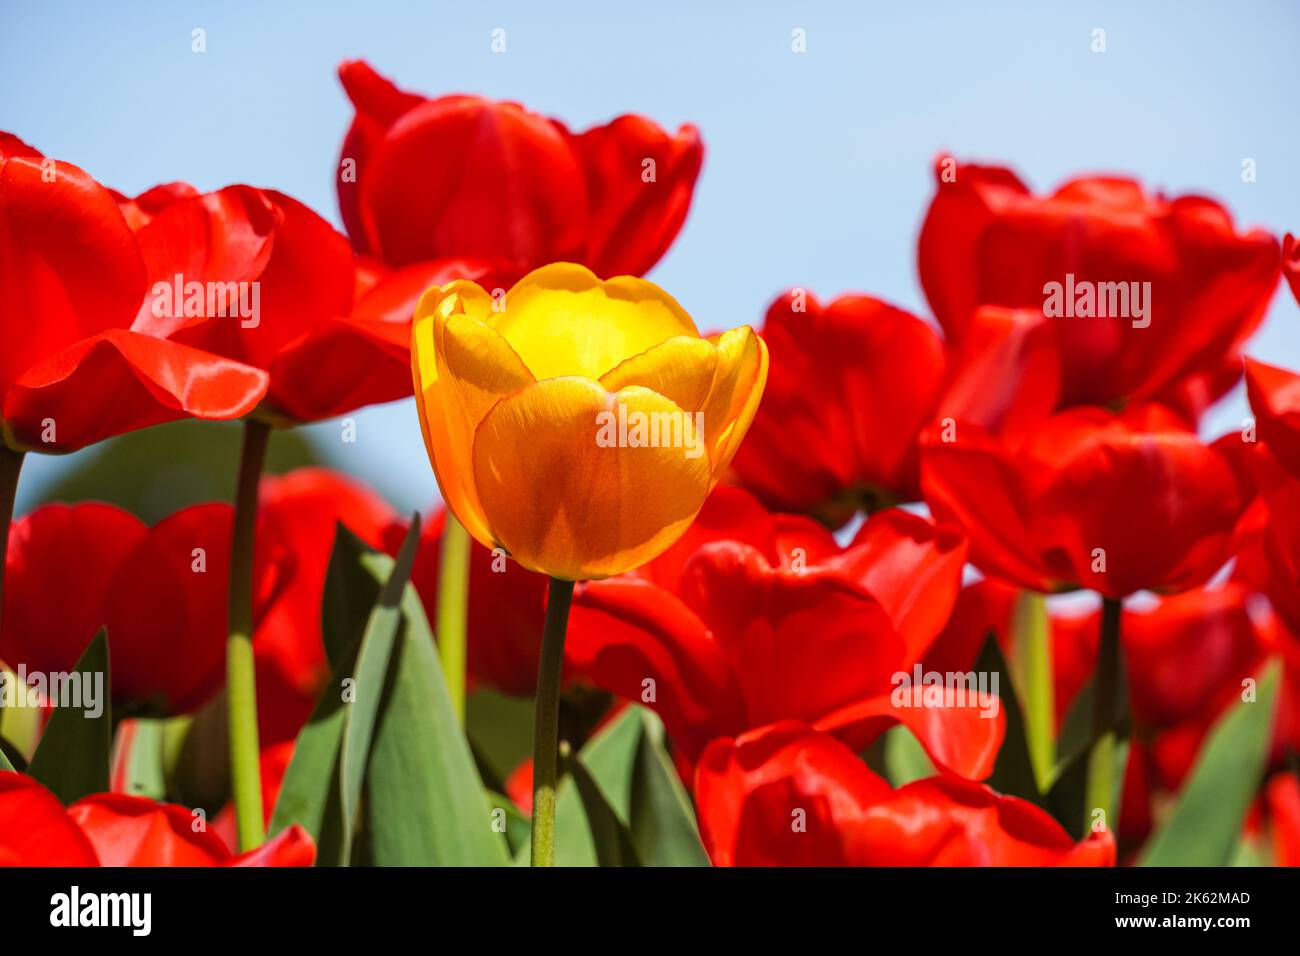 Blooming red tulips with one yellow tulip in the foreground Stock Photo